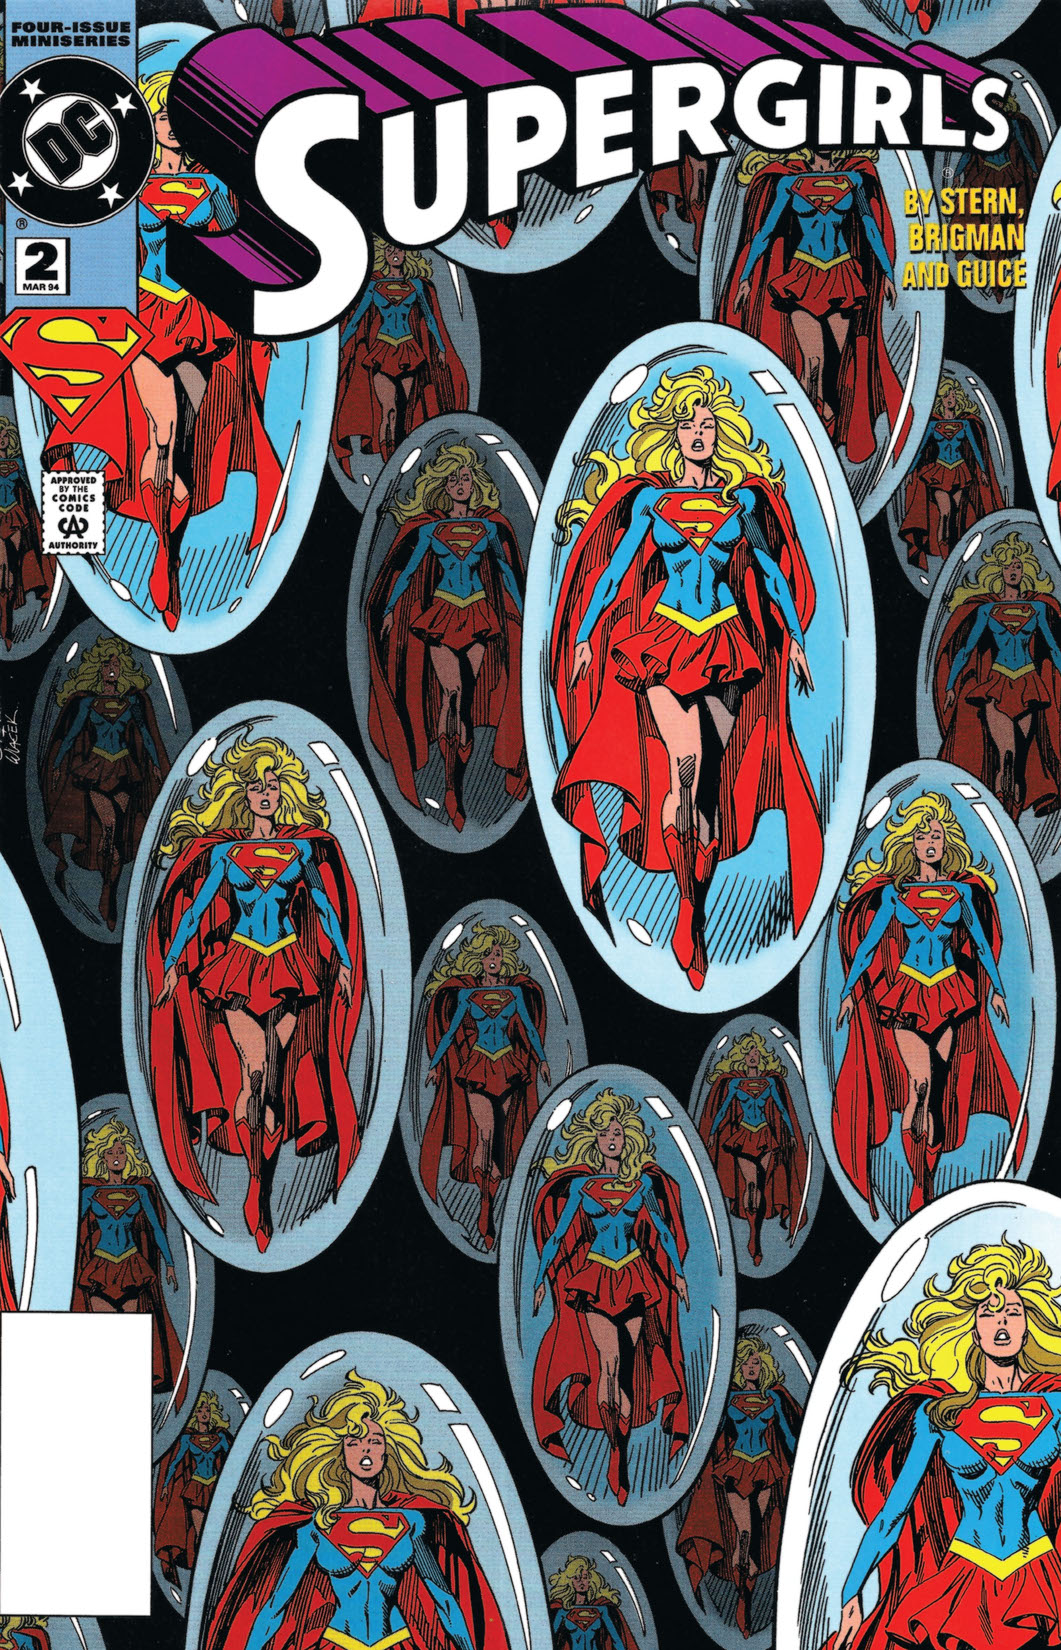 Supergirl (1993-) #2 preview images